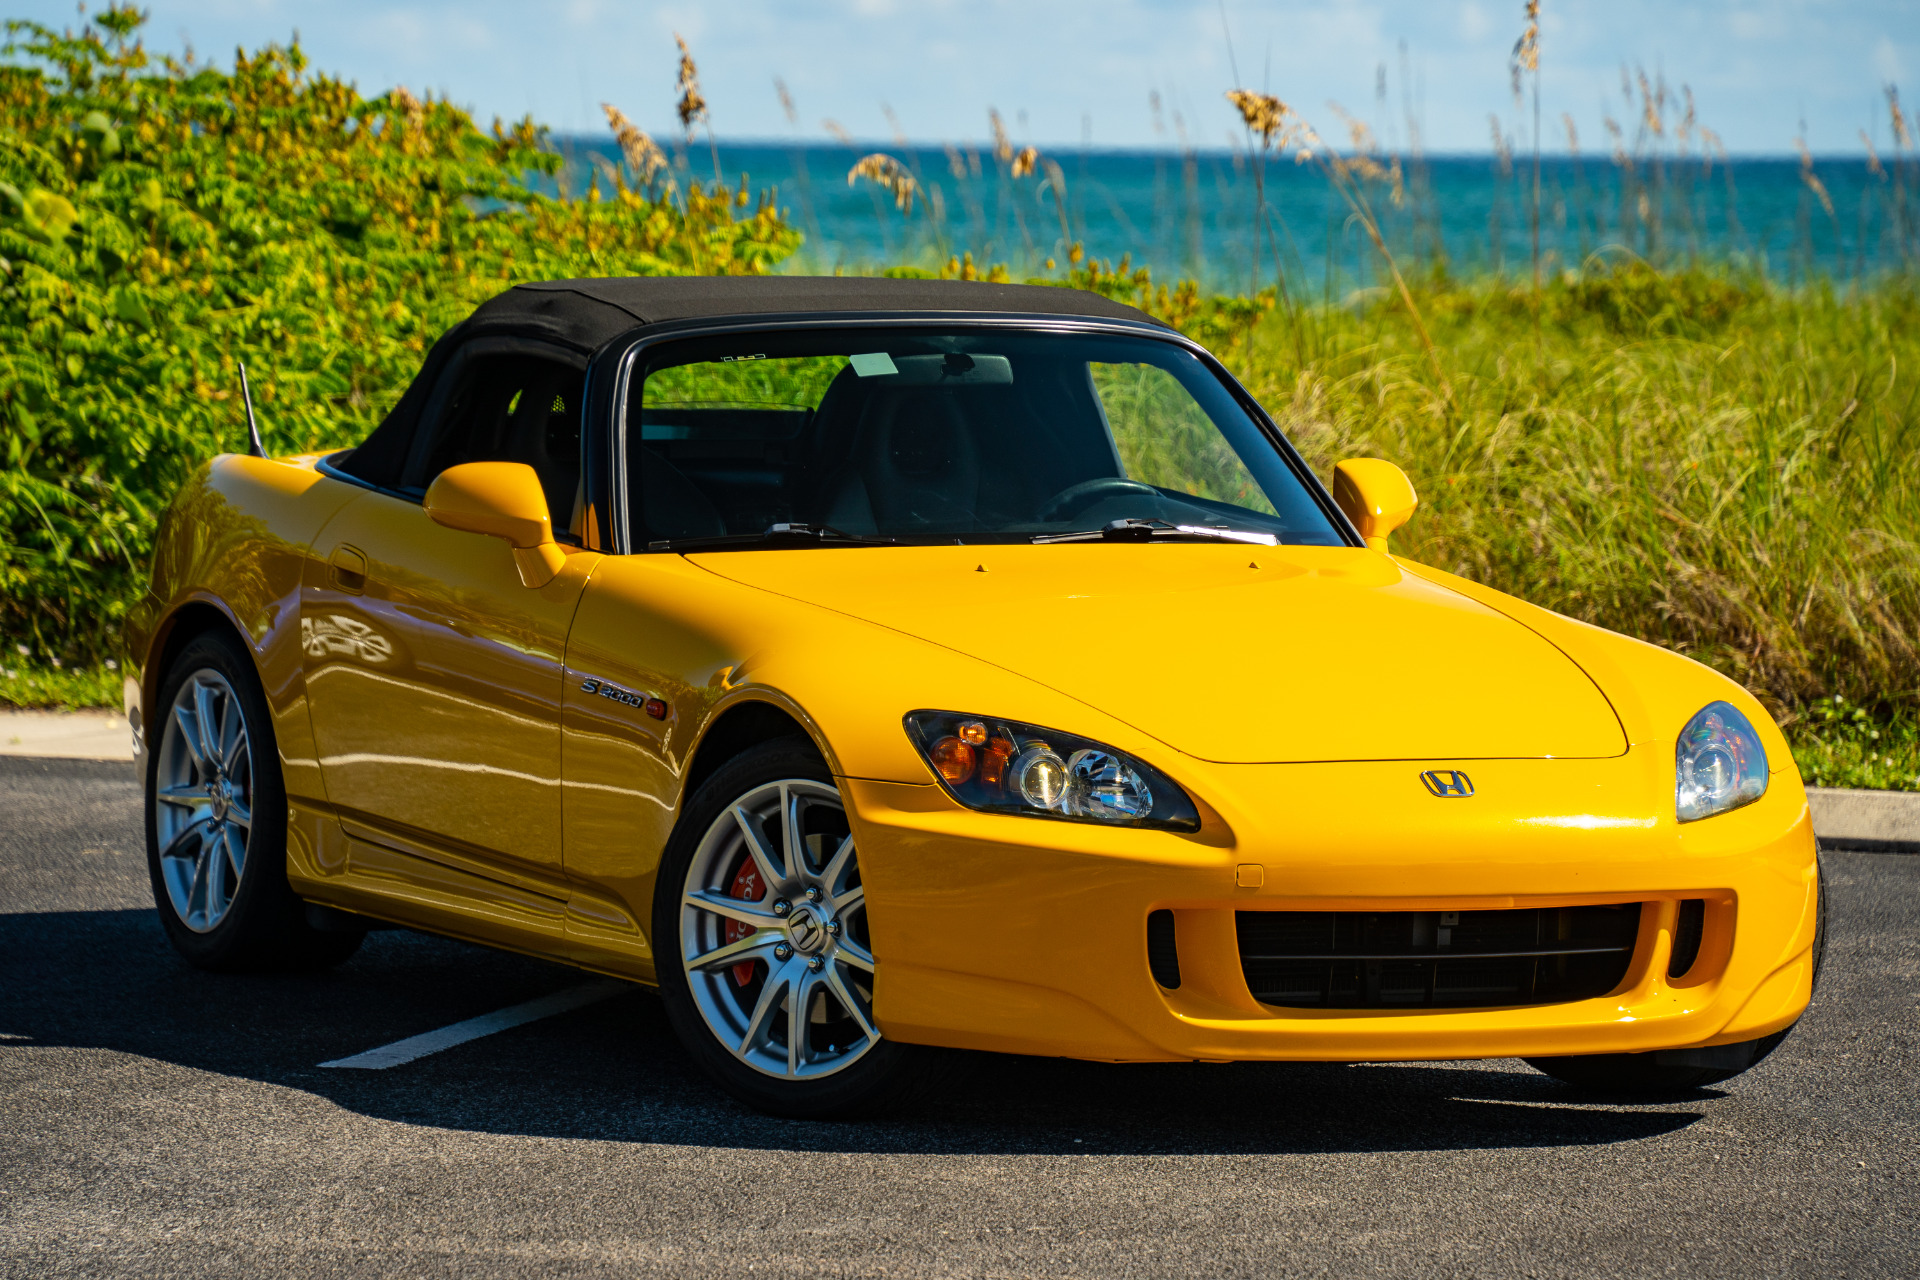 Pre-Owned 2005 Honda S2000 For Sale (Sold) | VB Autosports Stock #VB217